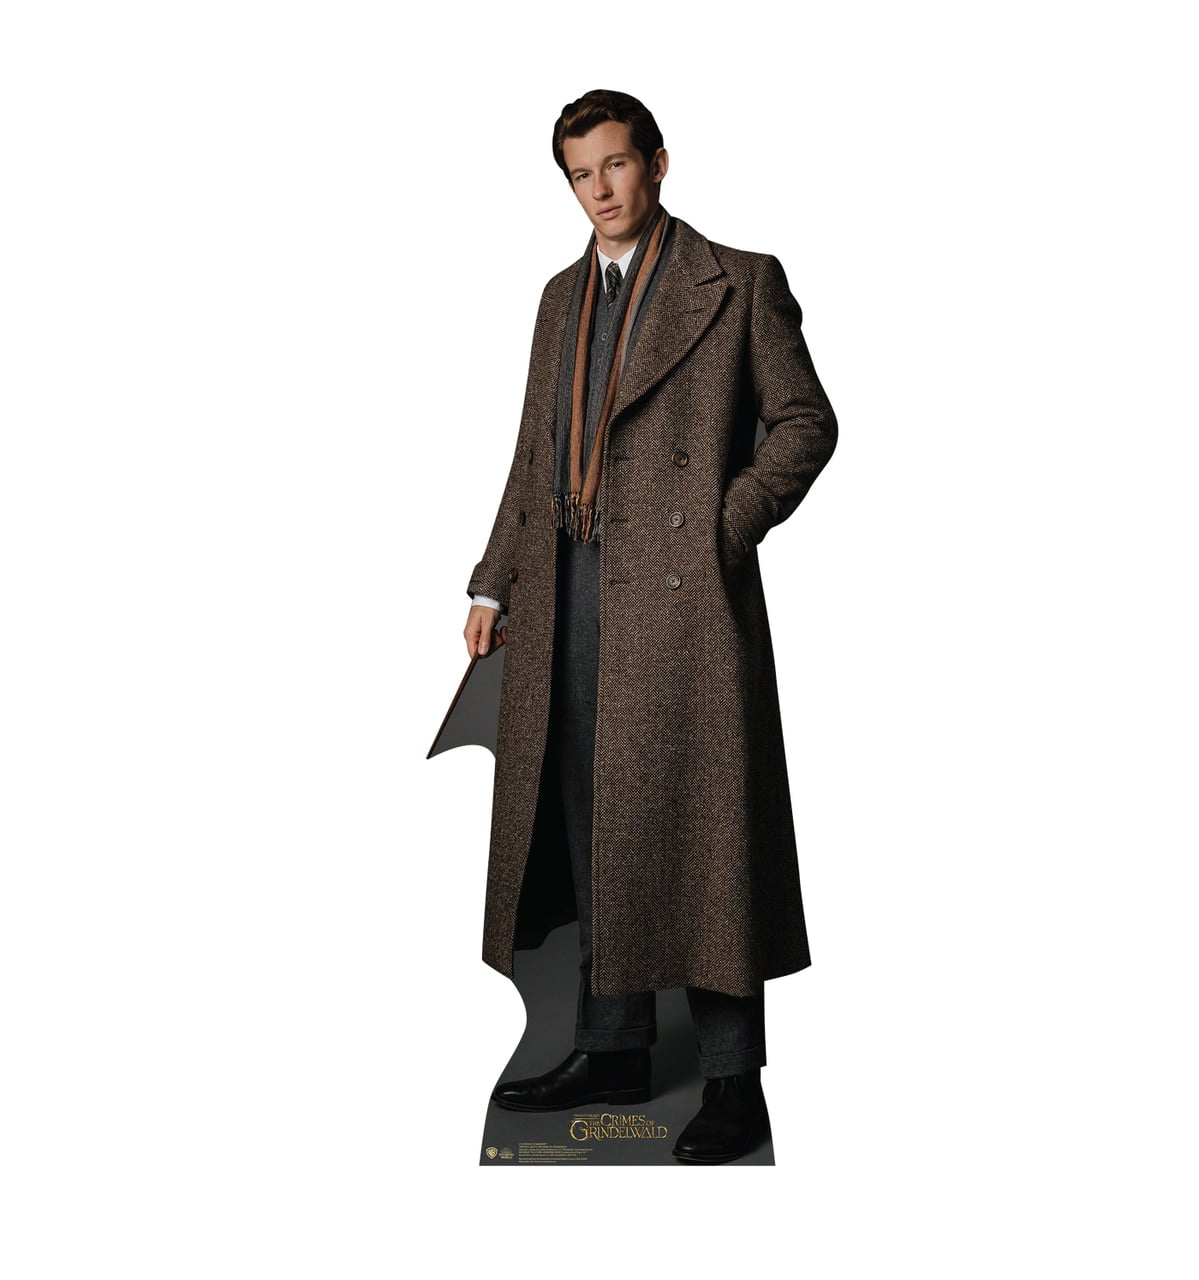 2776 73 x 28 in. Theseus Scamander Cardboard Cutout, Fantastic Beasts - The Crimes of Grindelwald -  Advanced Graphics